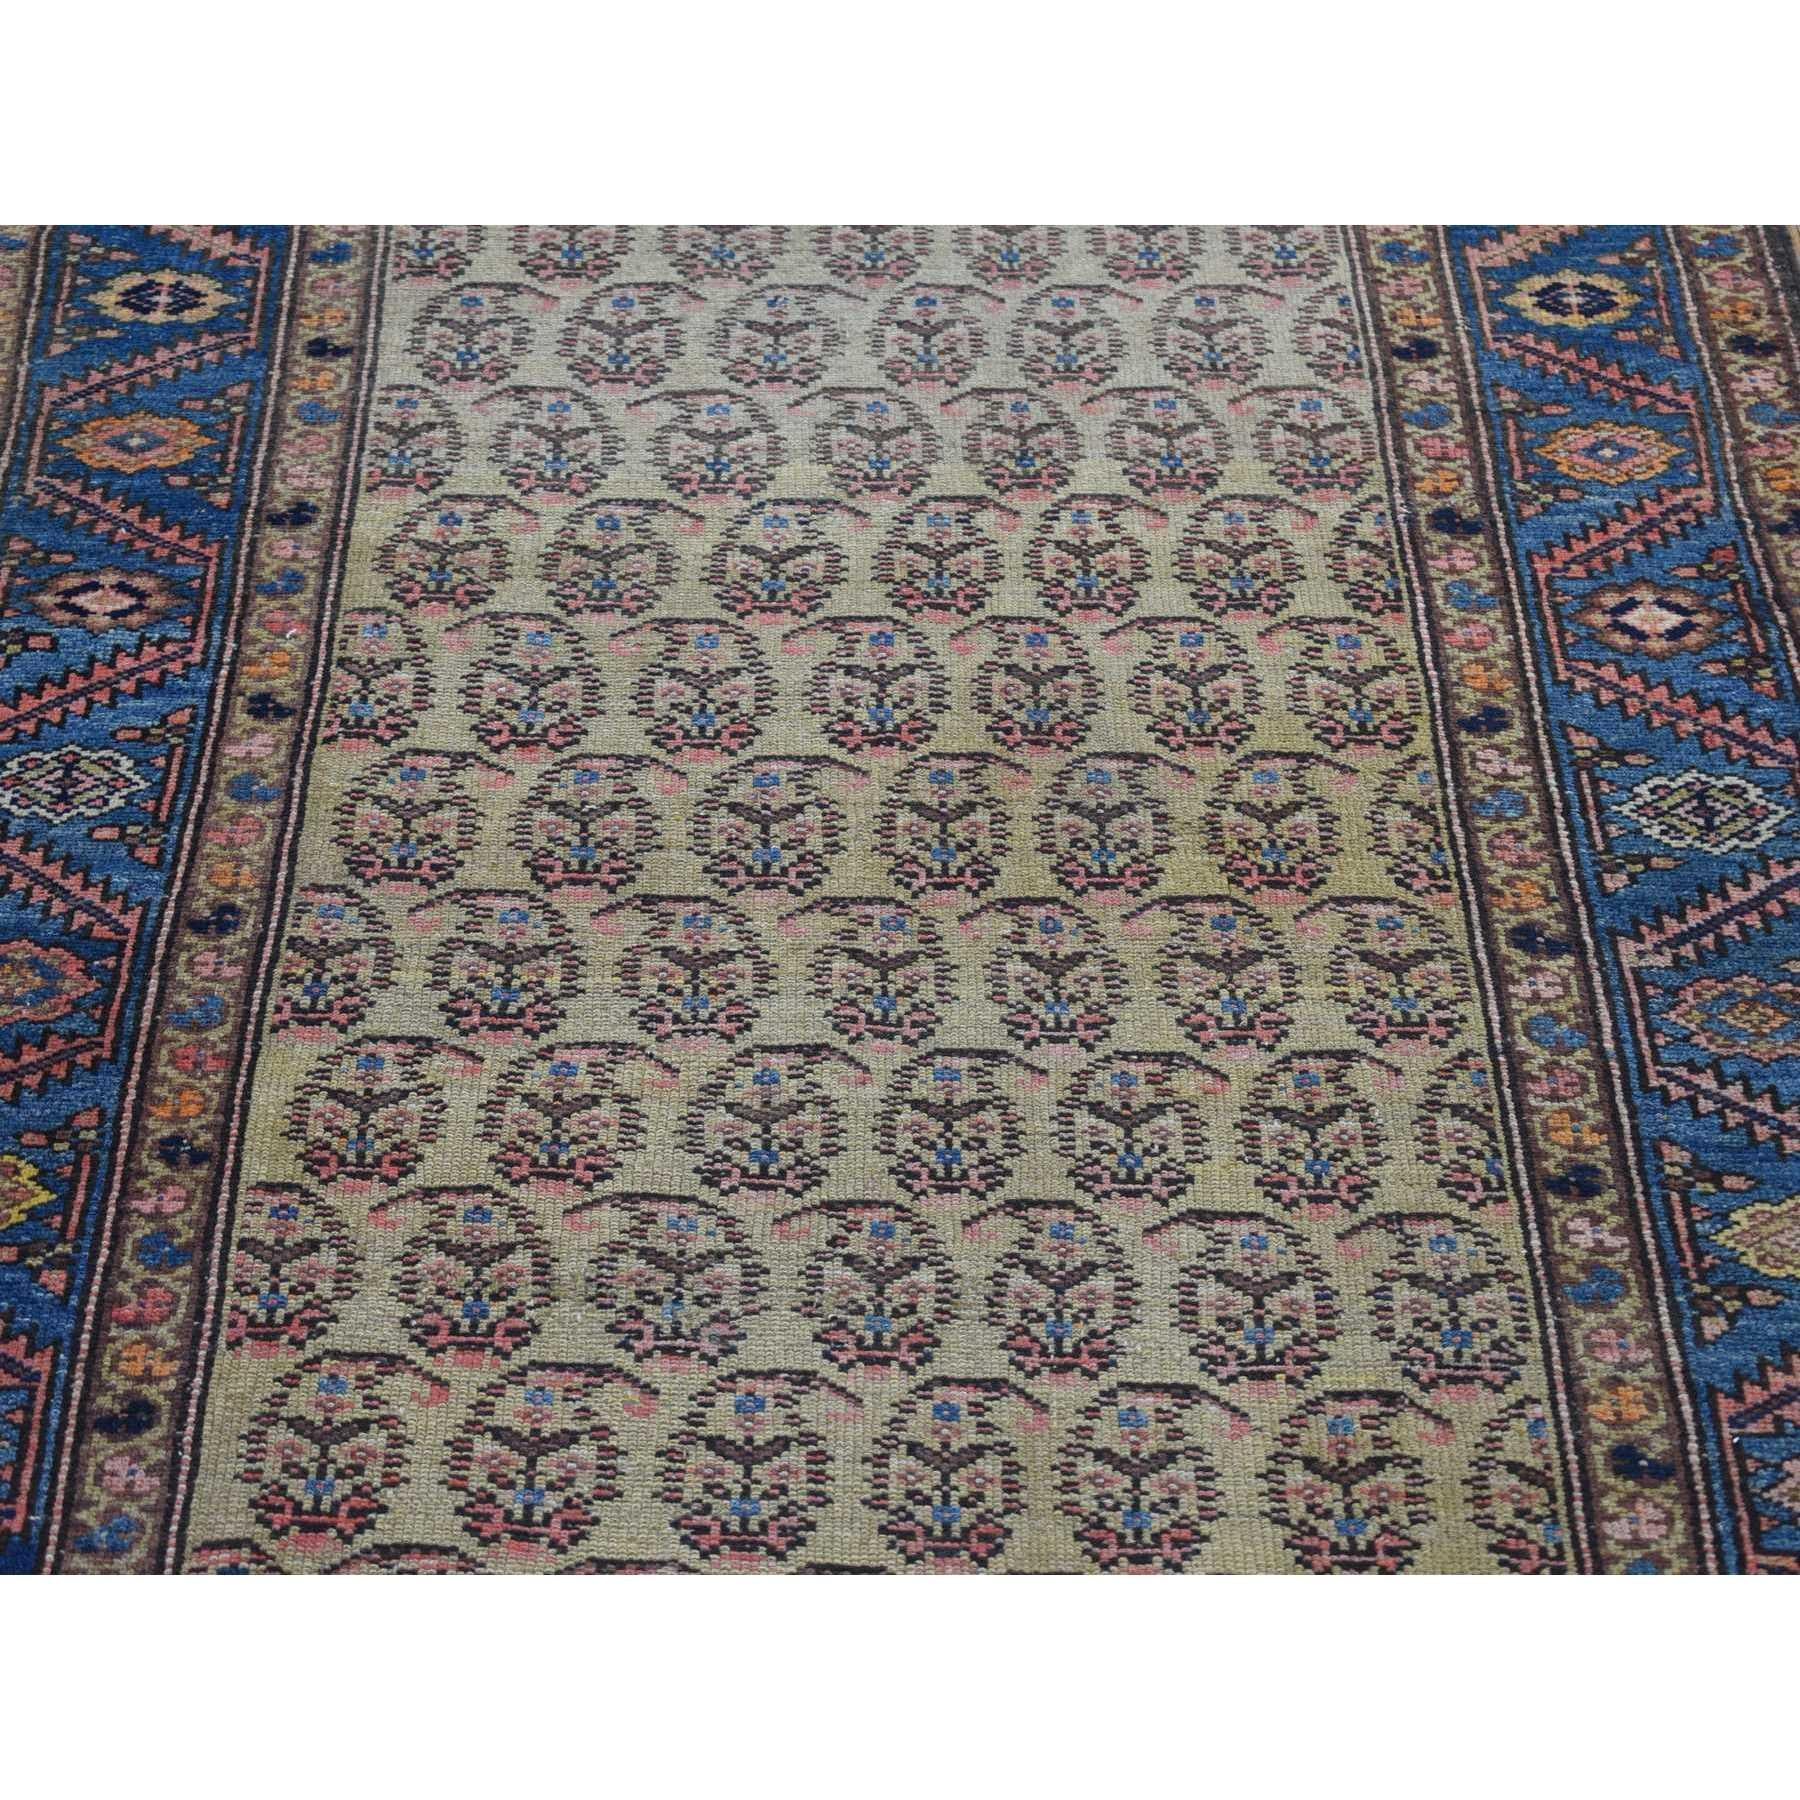 Yellow Antique Persian Bakshaish Abrash Paisley Design Wool Hand Knotted Rug In Good Condition For Sale In Carlstadt, NJ